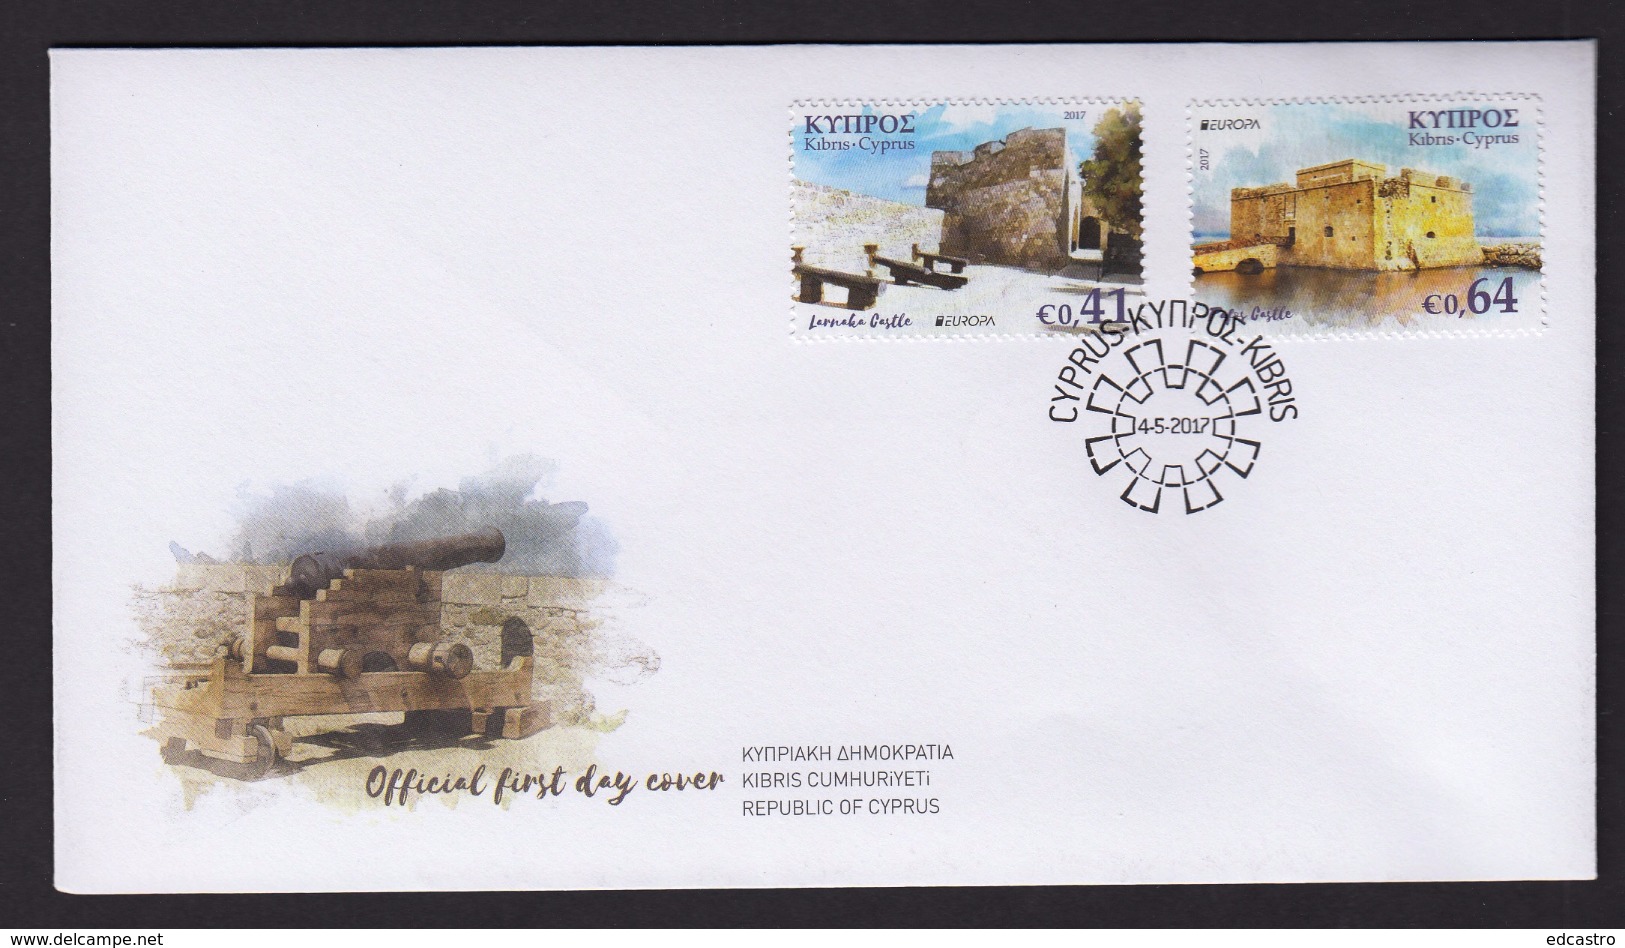 CYPRUS 2017 FDC EUROPA CASTLES - Covers & Documents